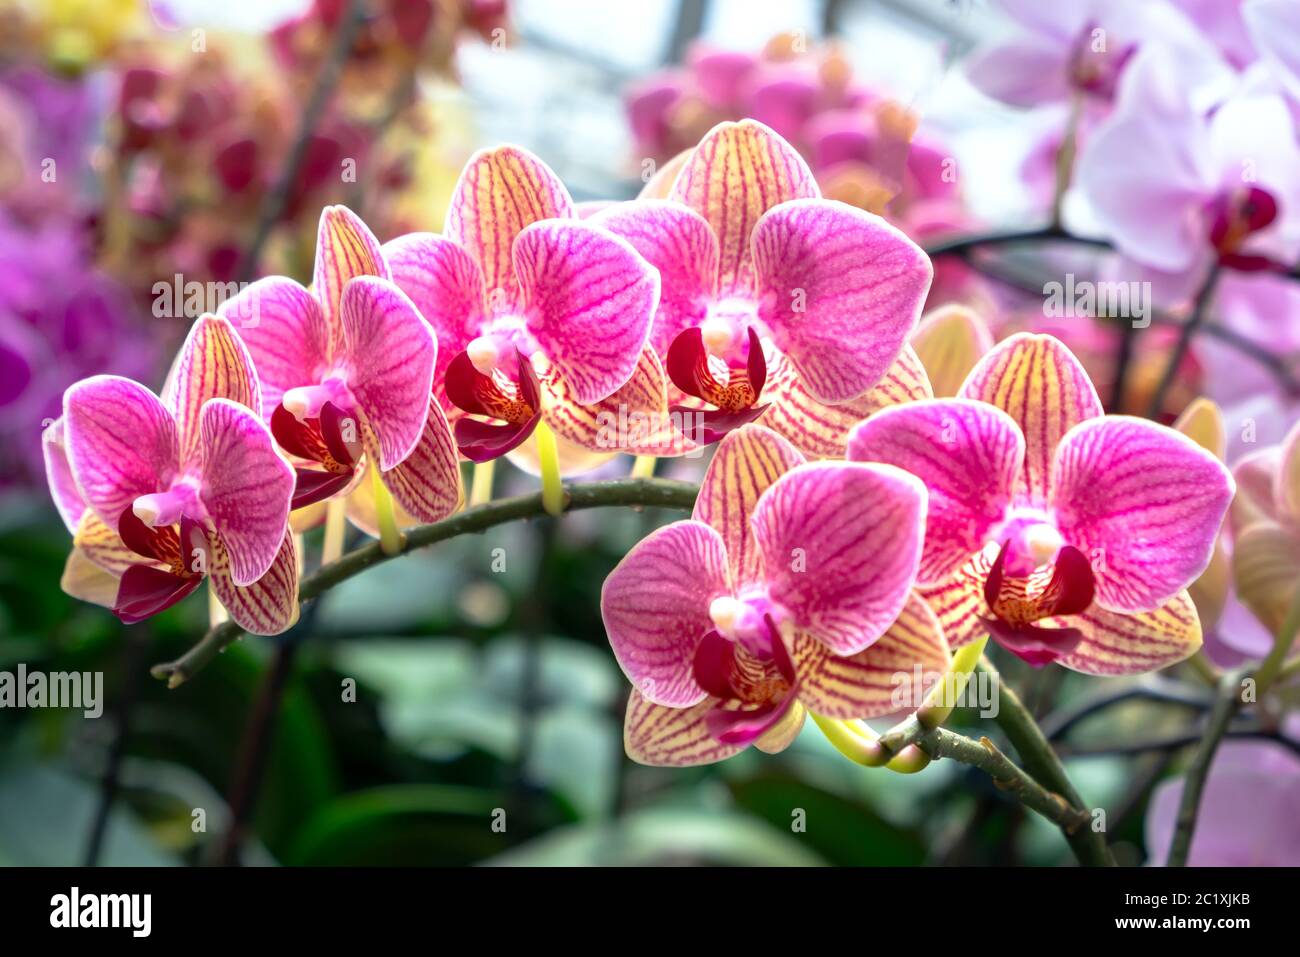 Phalaenopsis Orchids Bloom In A Variety Of Colors In The Garden Waiting To Be Brought To The Flower Market For Sale To Customers Stock Photo Alamy